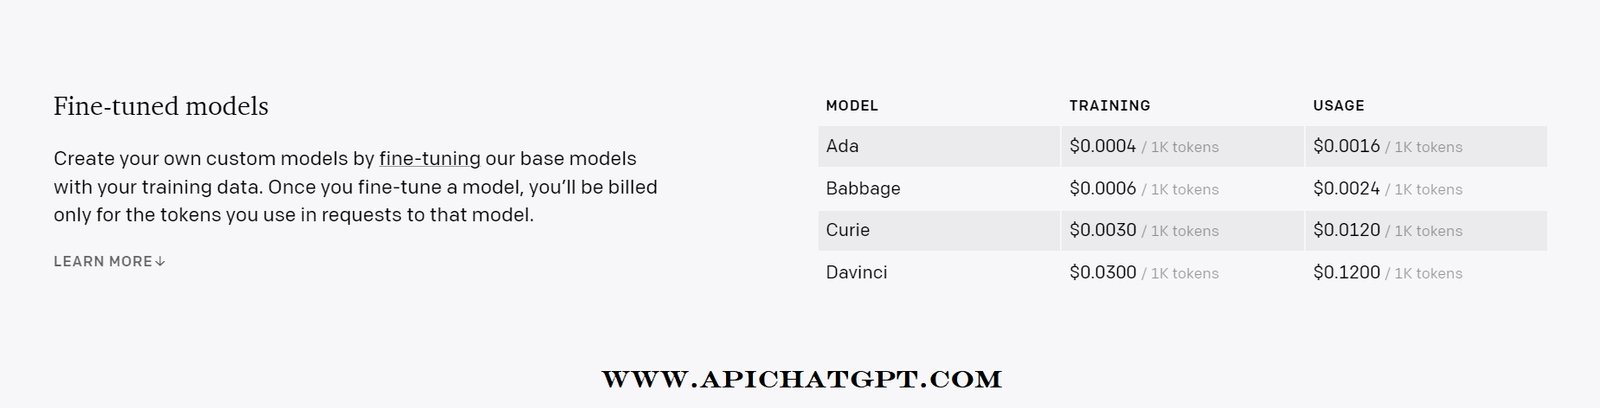 API Pricing Plans for Fine-tuned models